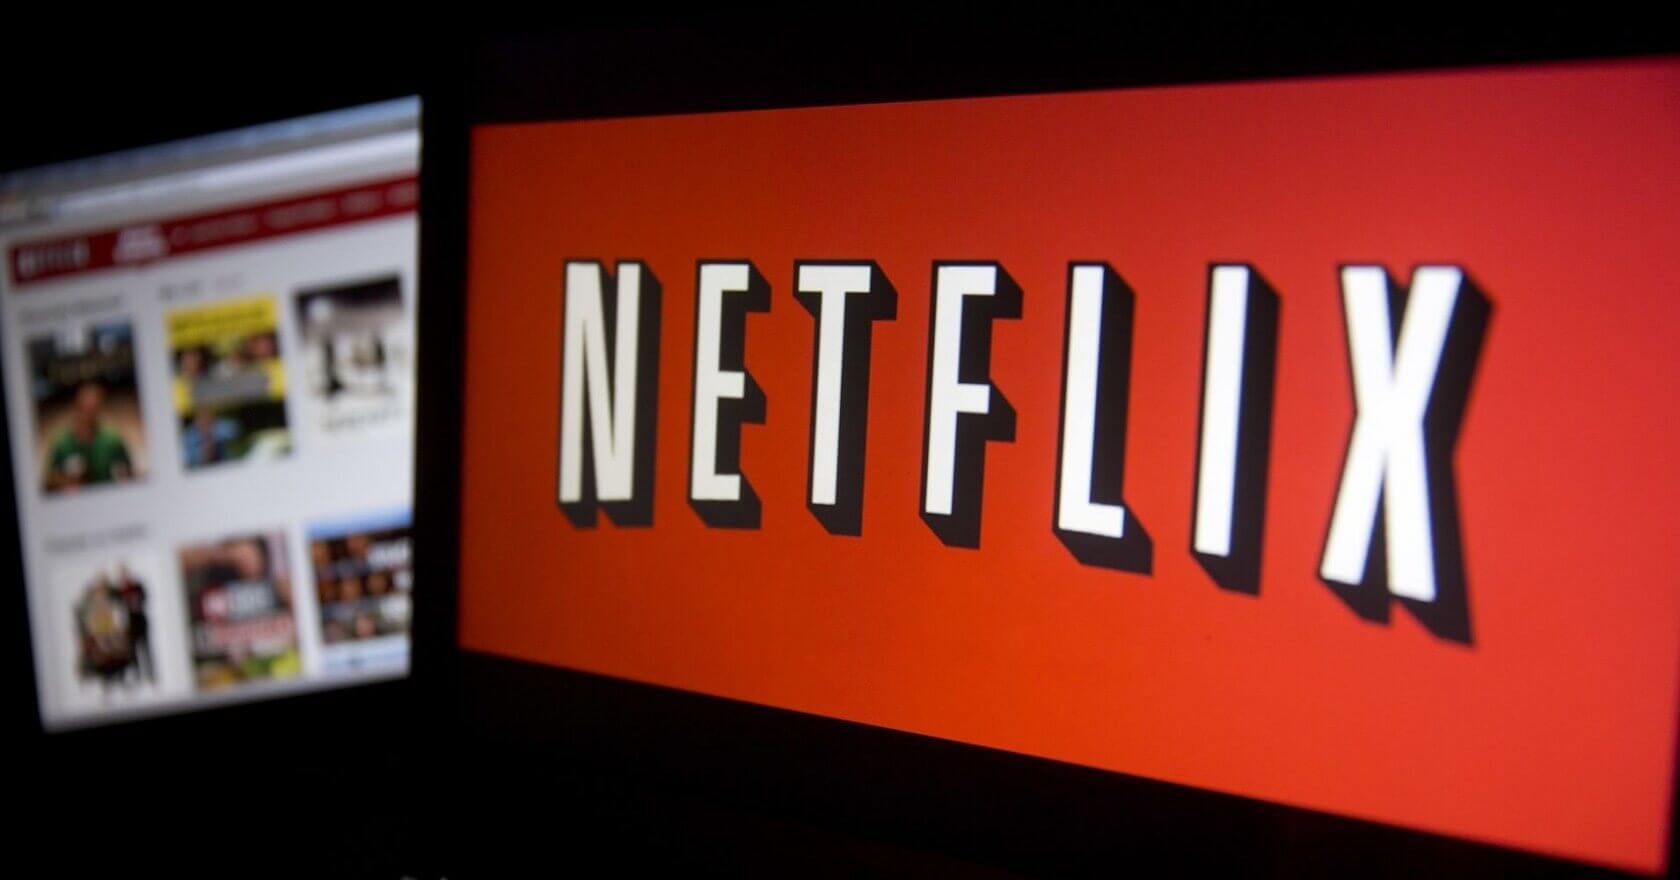 Netflix acquired 10 million new subscribers in Q2 2020